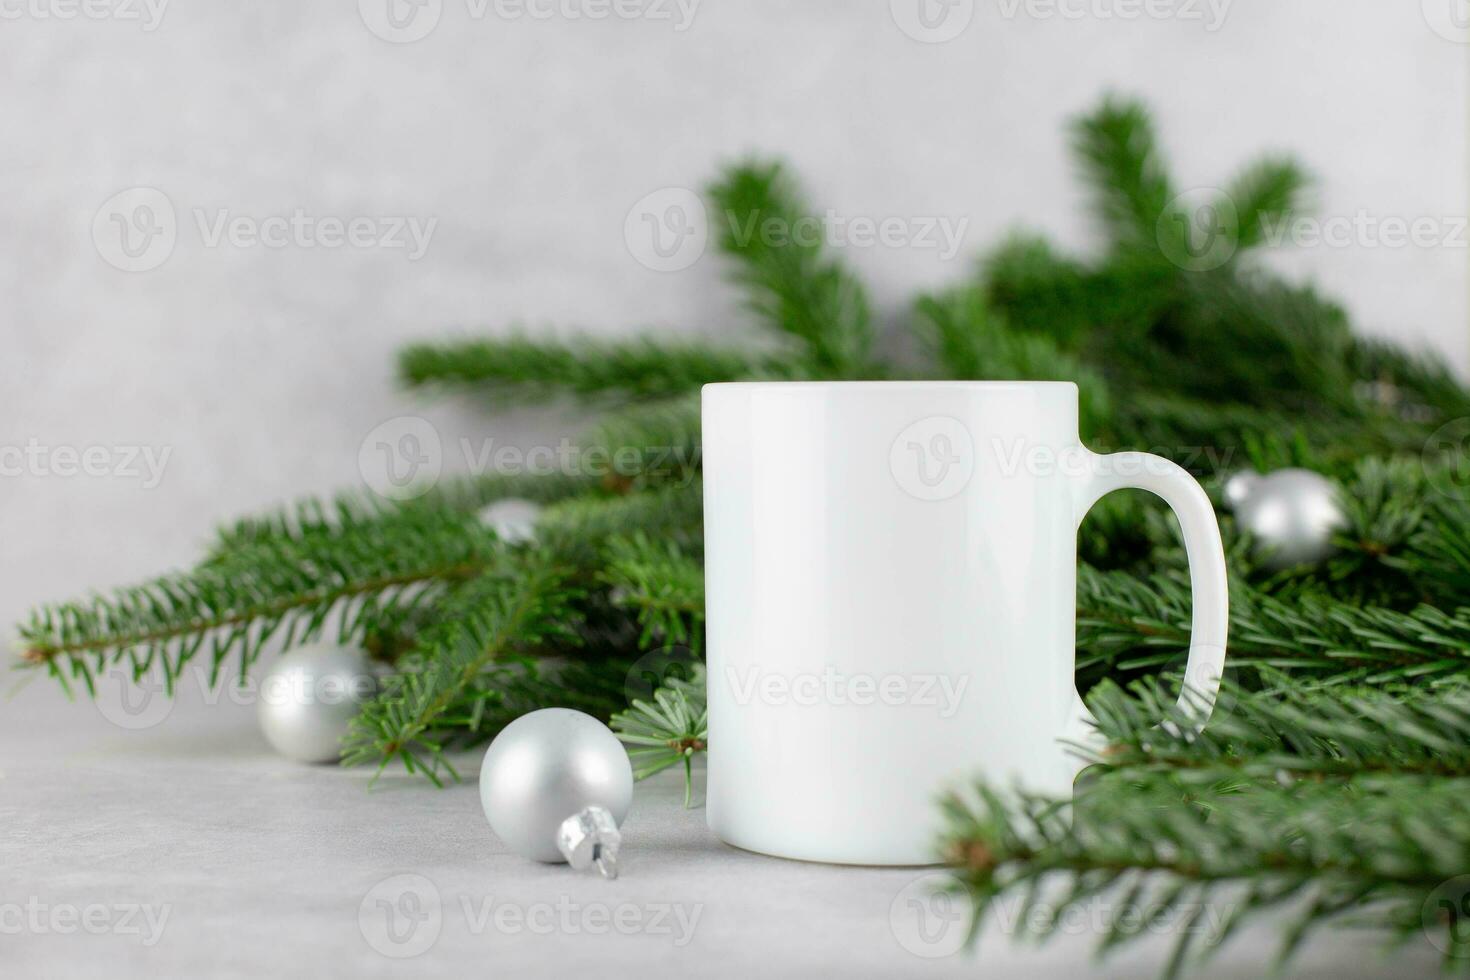 Blank white mug mockup with christmas tree branches and silver balls on light concrete stone background. Holiday composition. Side view. Copy space. photo